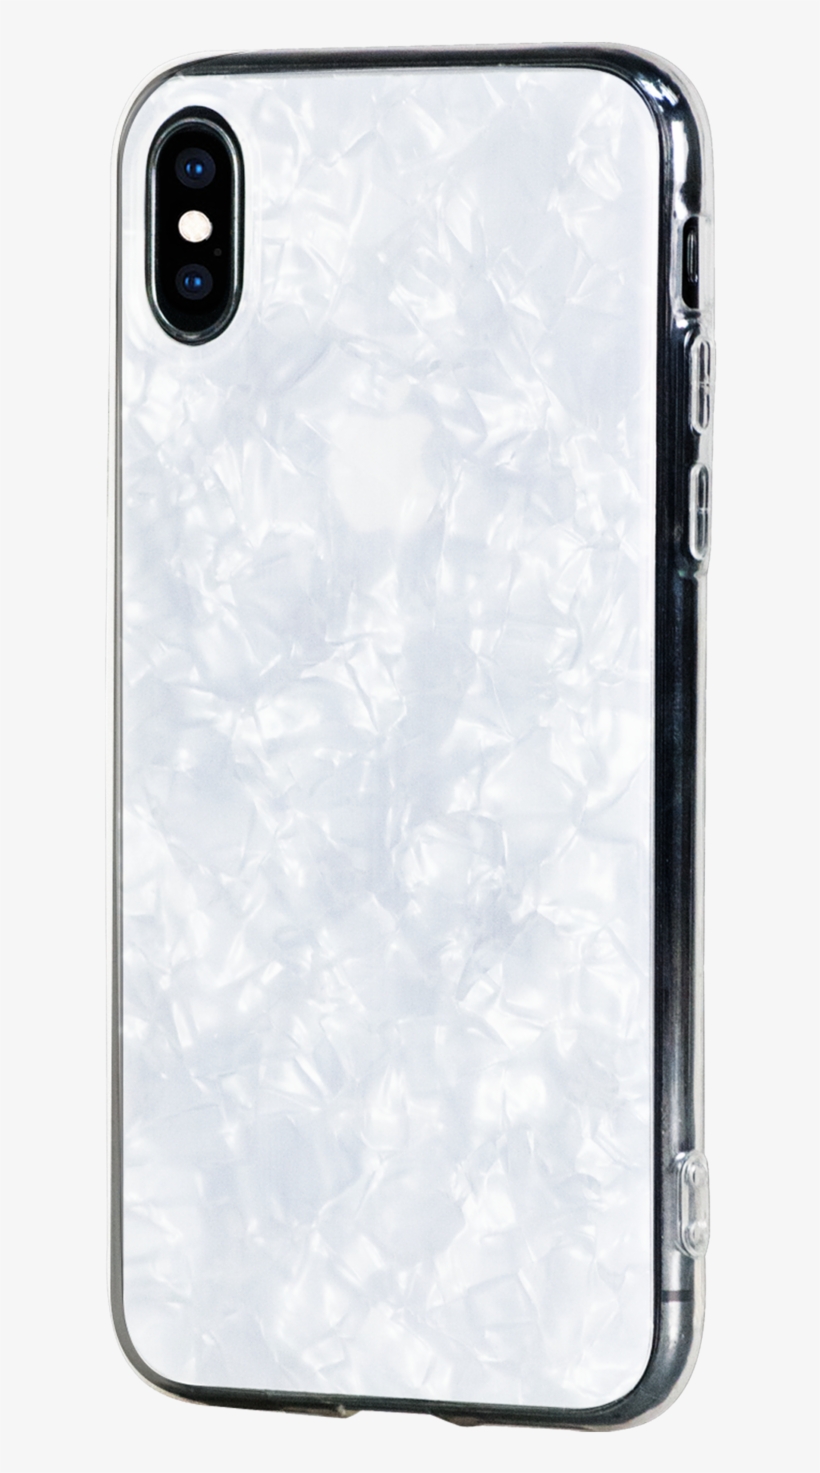 Chic ᛫ Pearl White ᛫ With Shimmering Effect ᛫ Double-layered - Mobile Phone Case, transparent png #7942417